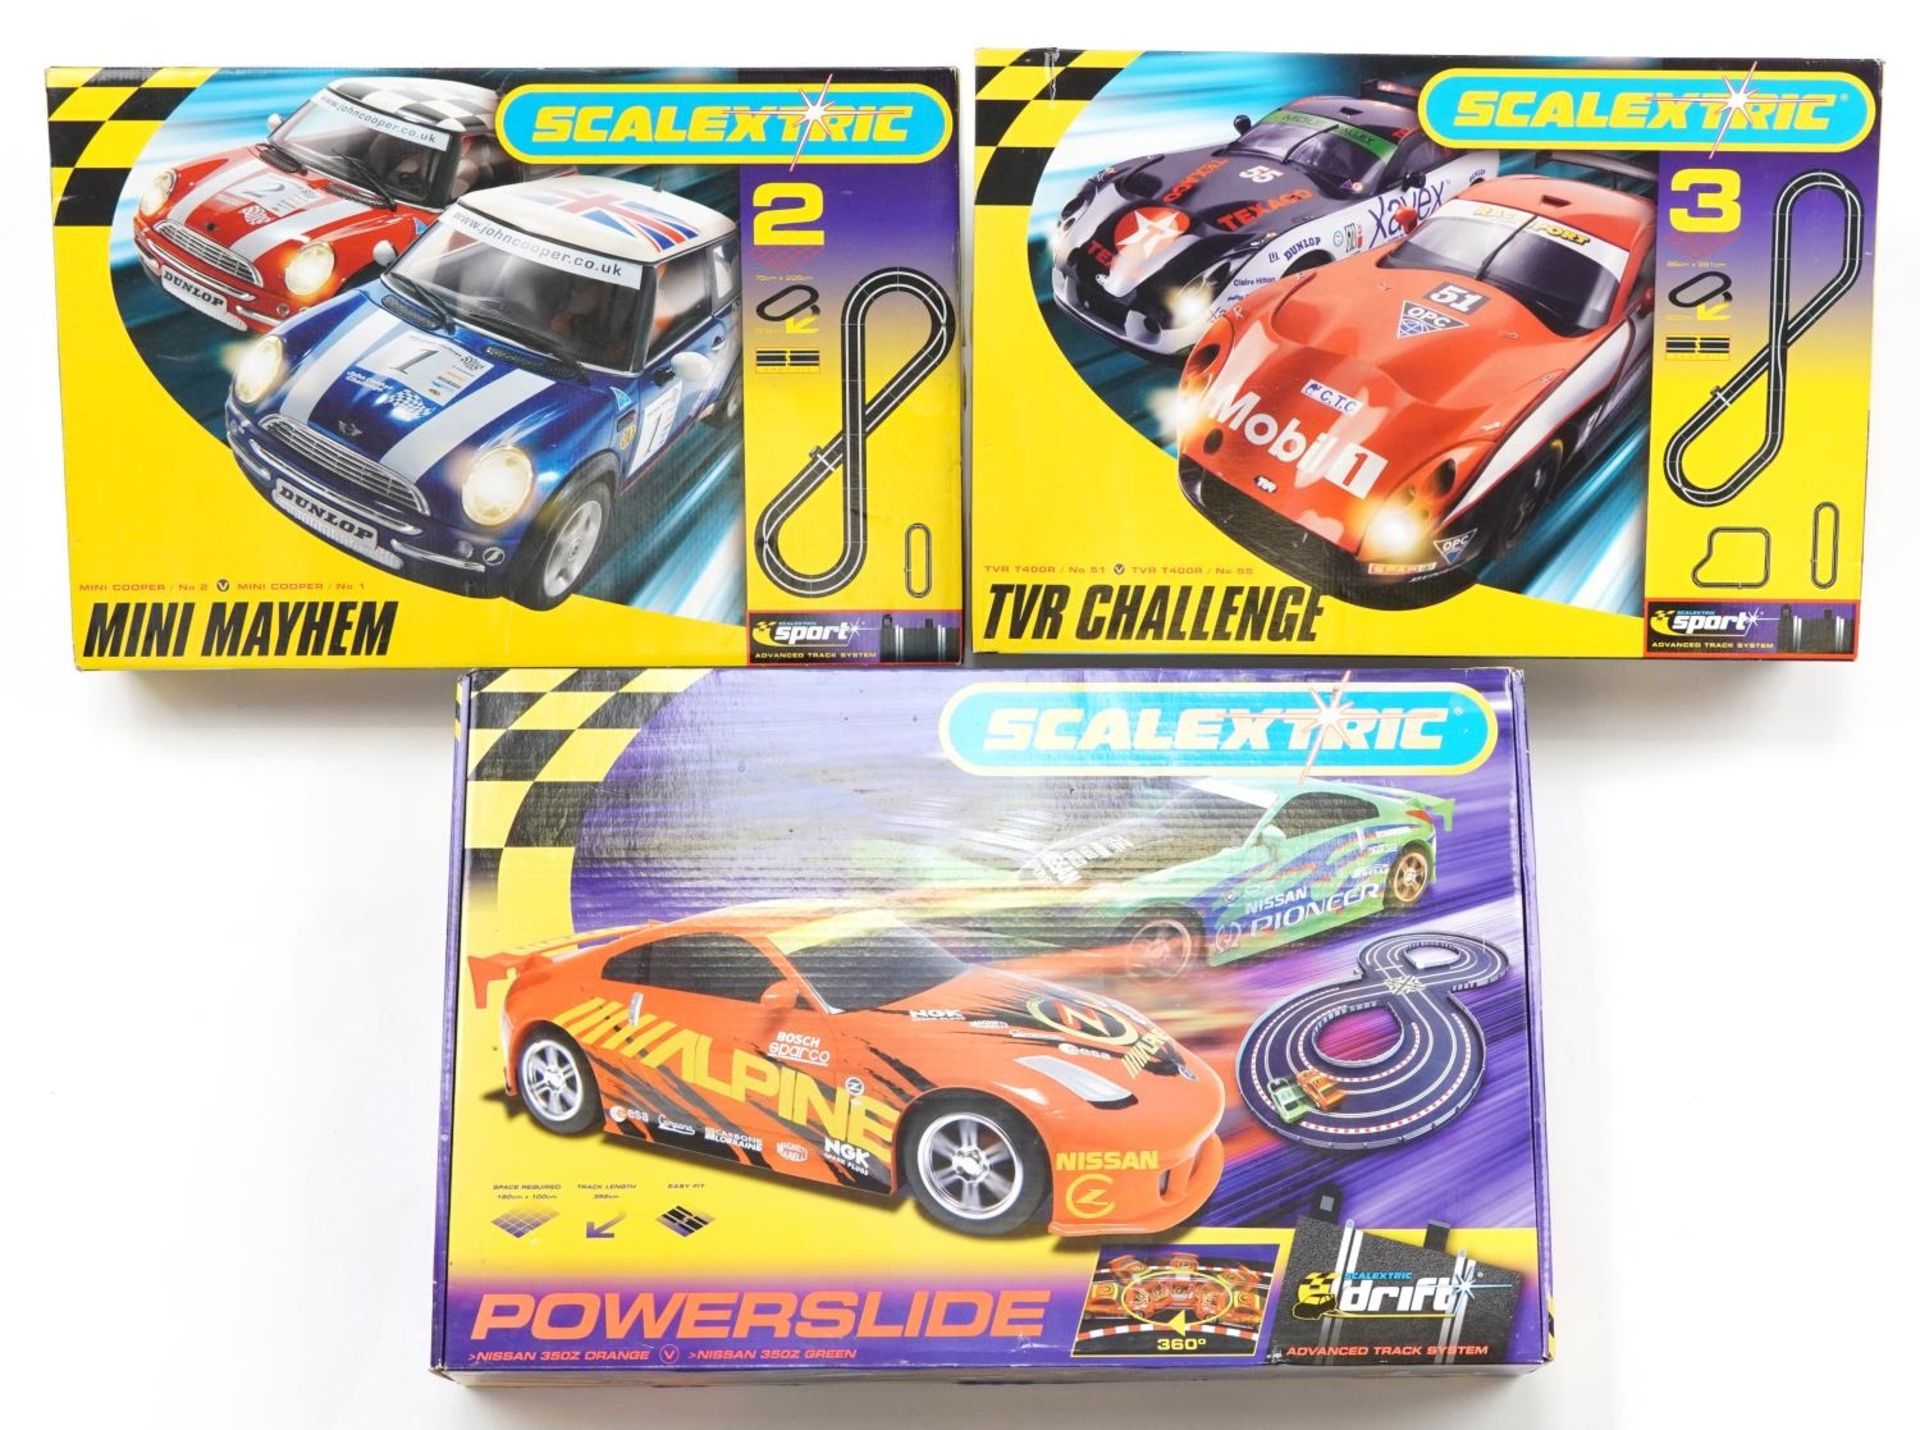 Three Scalextric 1:32 scale slot car racing sets comprising Mini Mayhem, TVR Challenge and Power